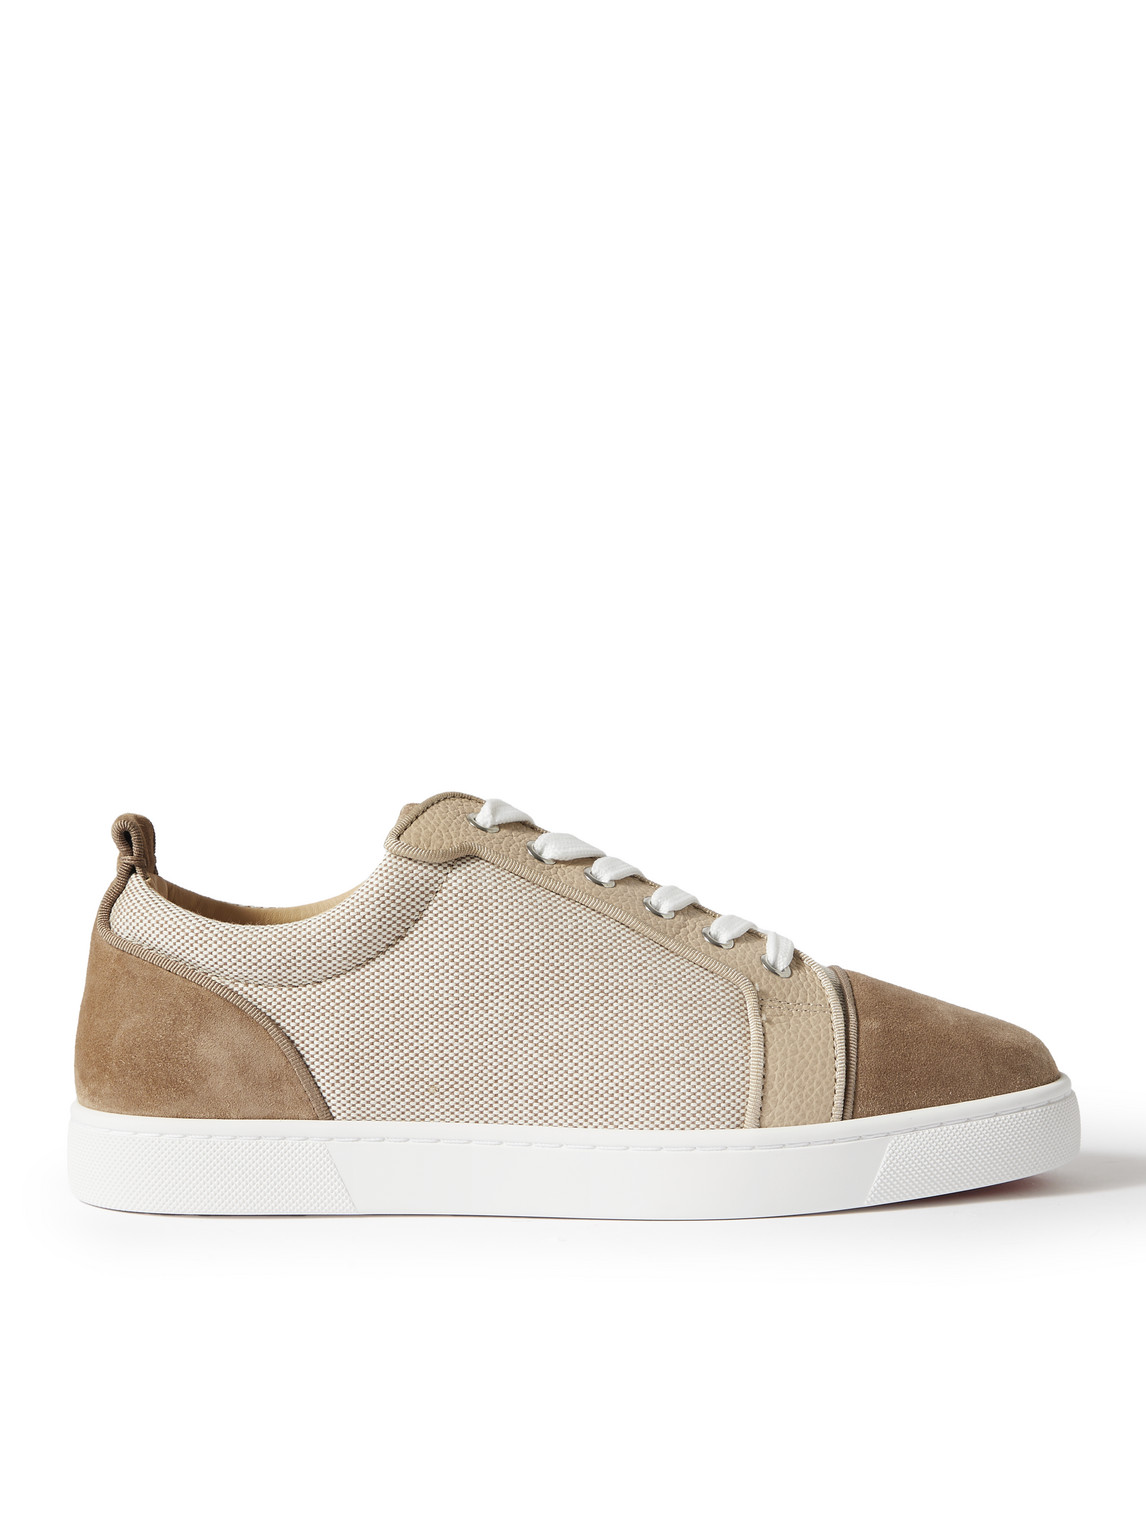 Christian Louboutin Louis Junior Linen, Leather And Suede Leather Trainers In Brown